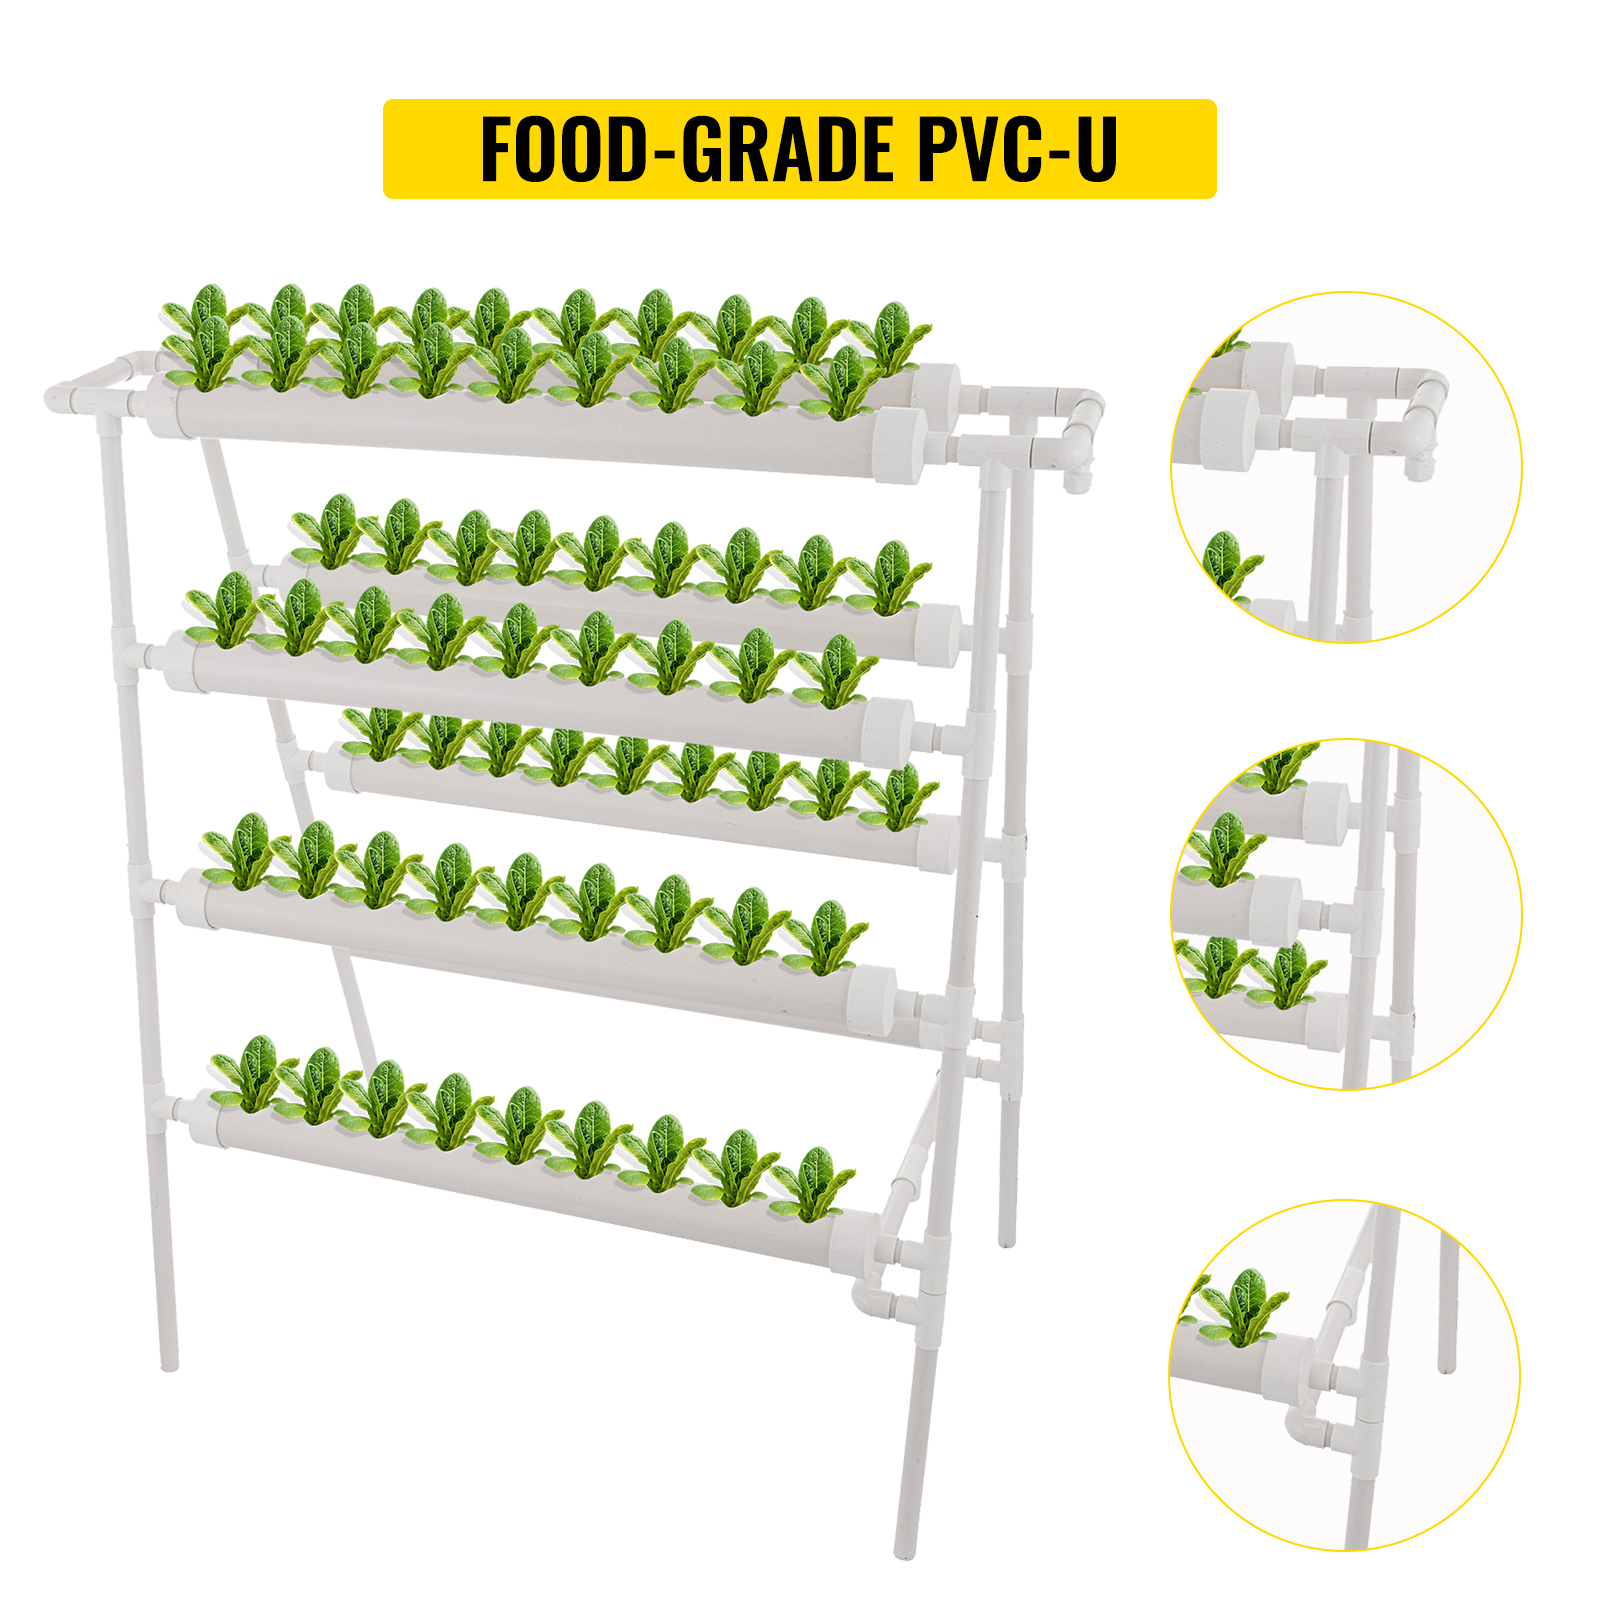 Details about   66 Holes Hydroponic Site Grow Kit Vegetable System Stainless Steel Holder USA